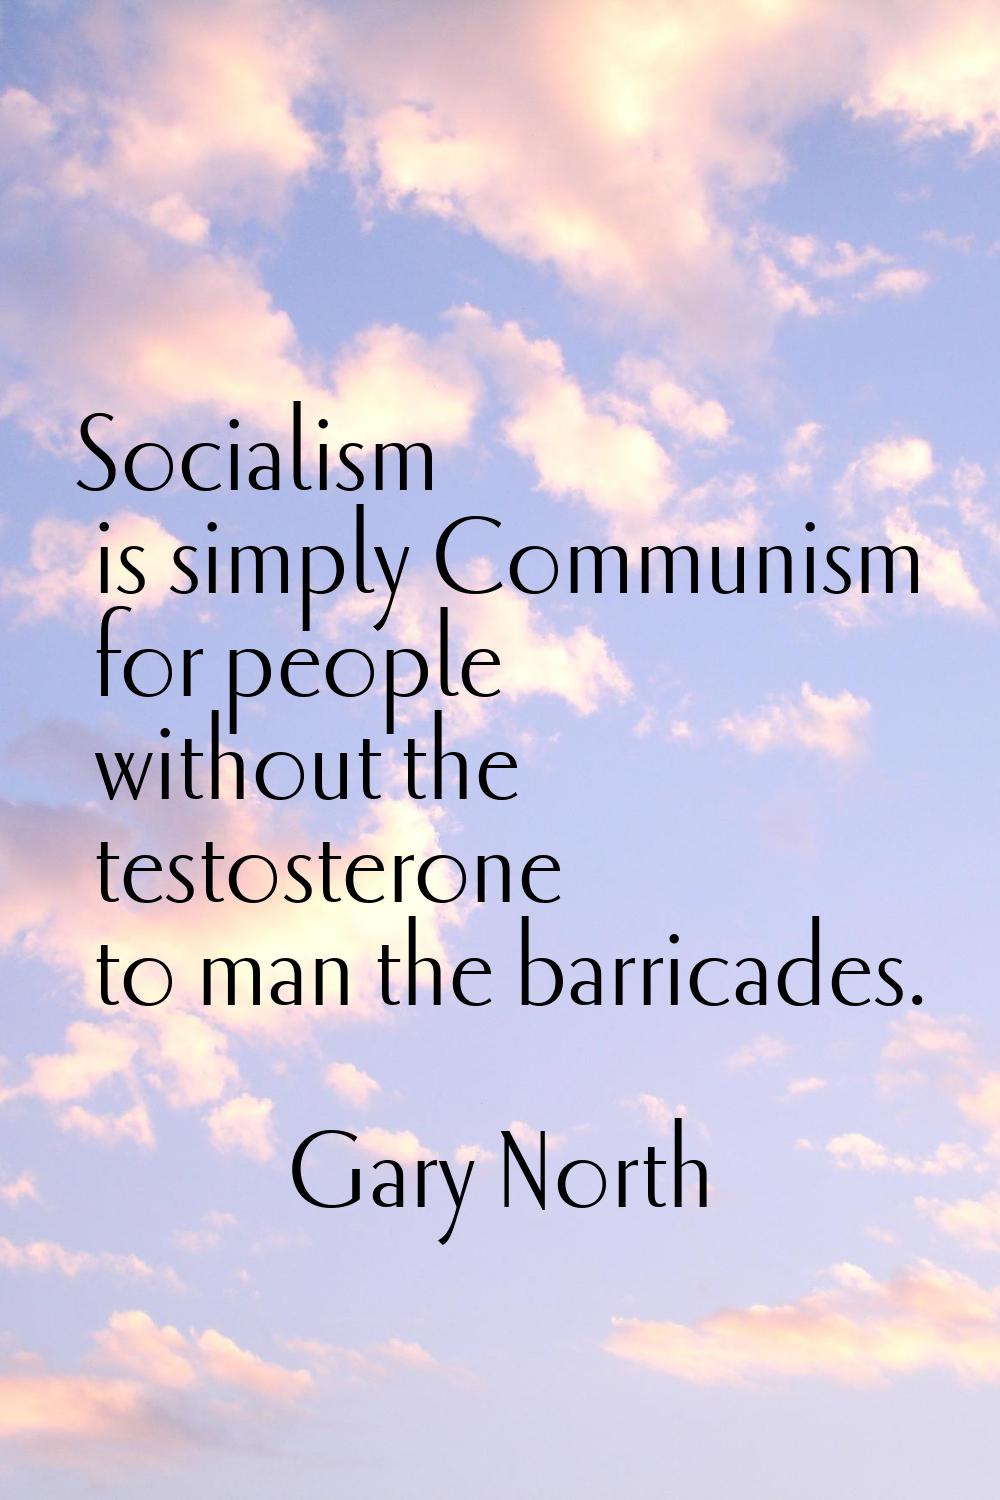 Socialism is simply Communism for people without the testosterone to man the barricades.